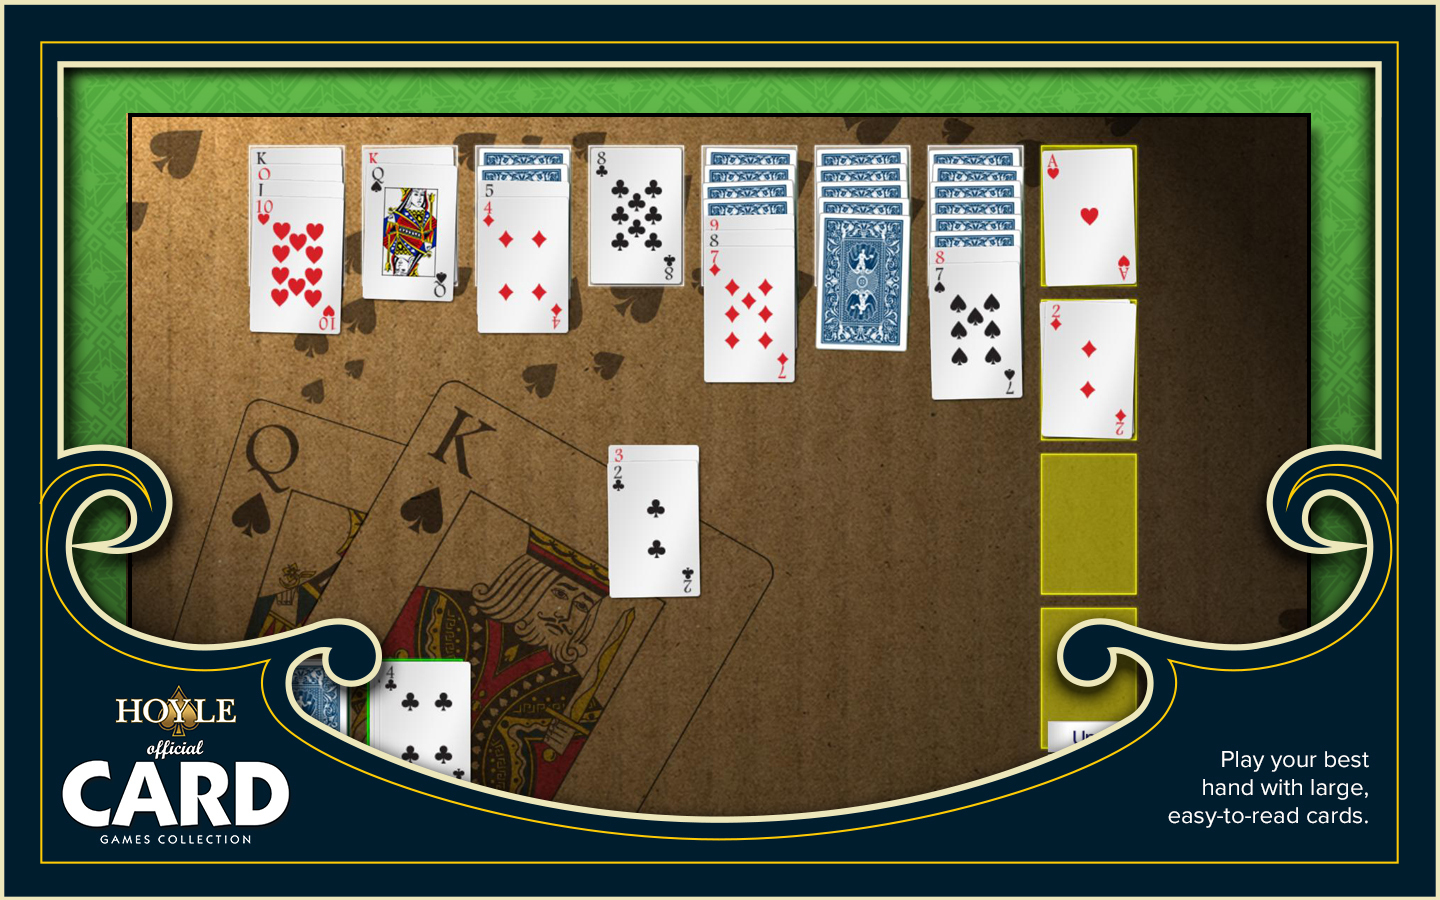 Hoyle card games for mac download utorrent